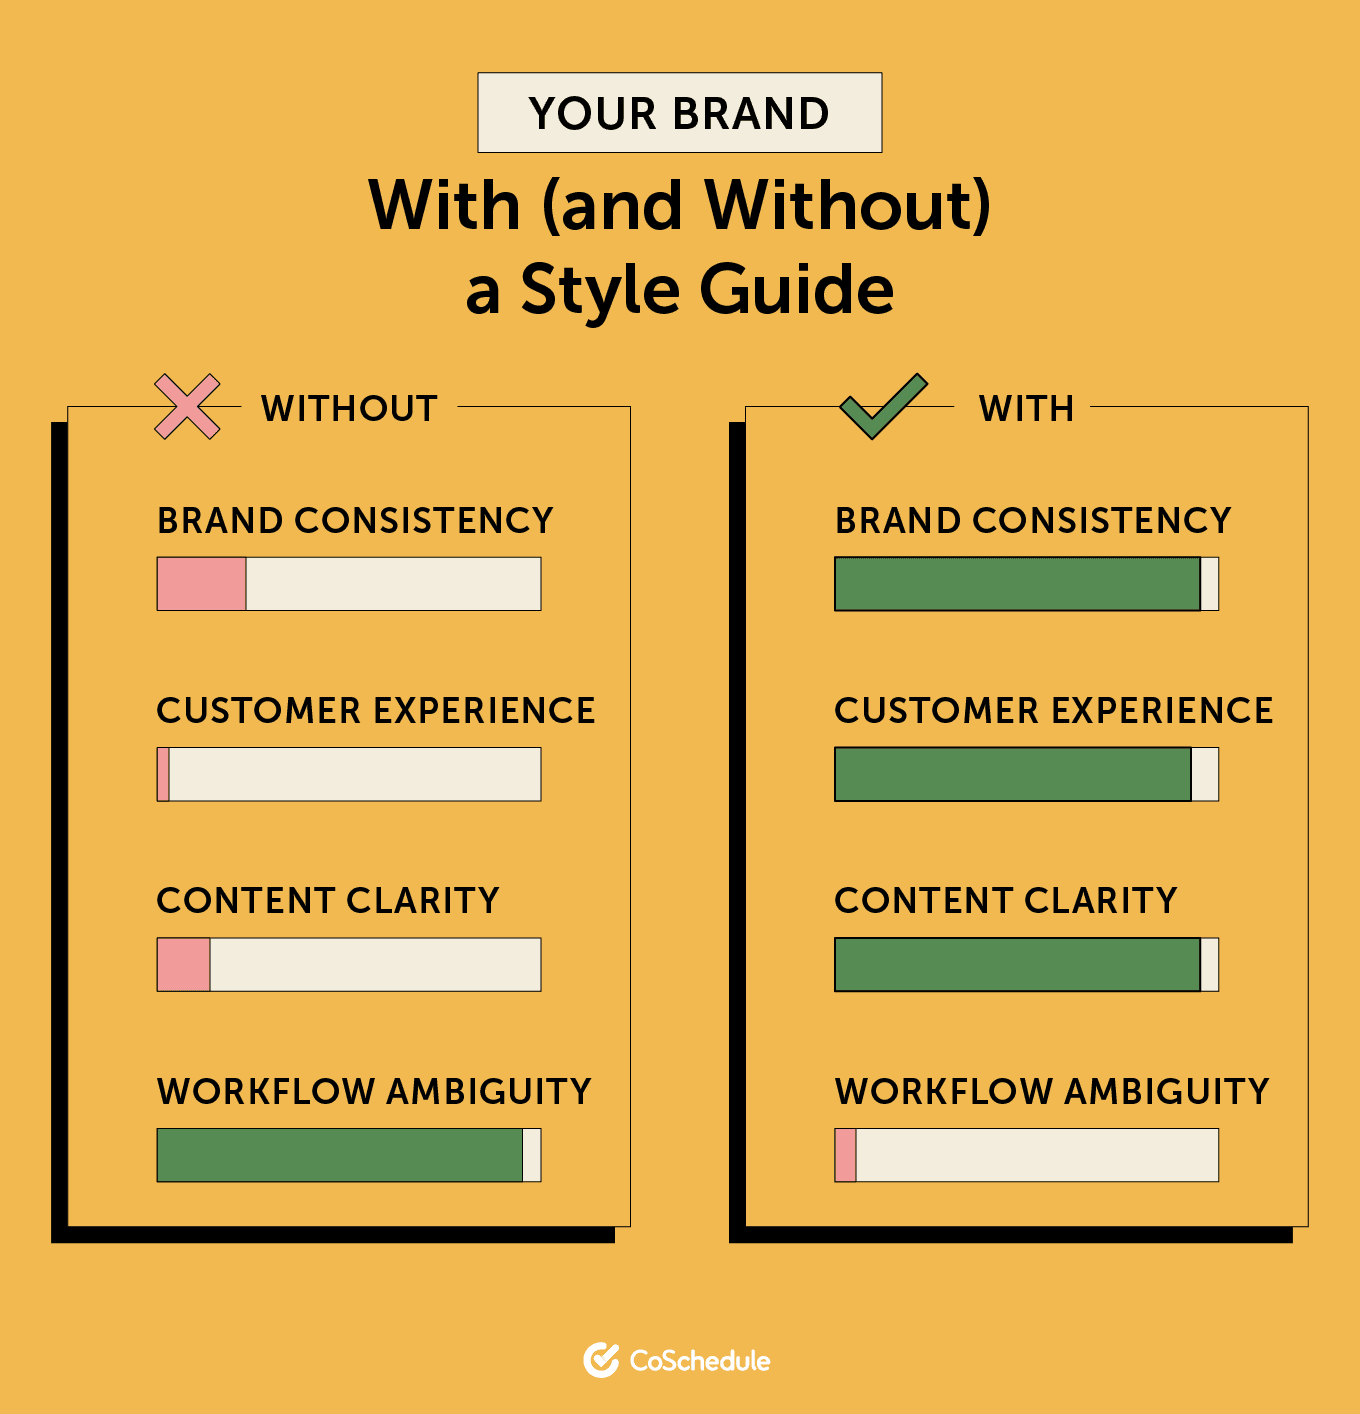 Your brand with and without a style guide